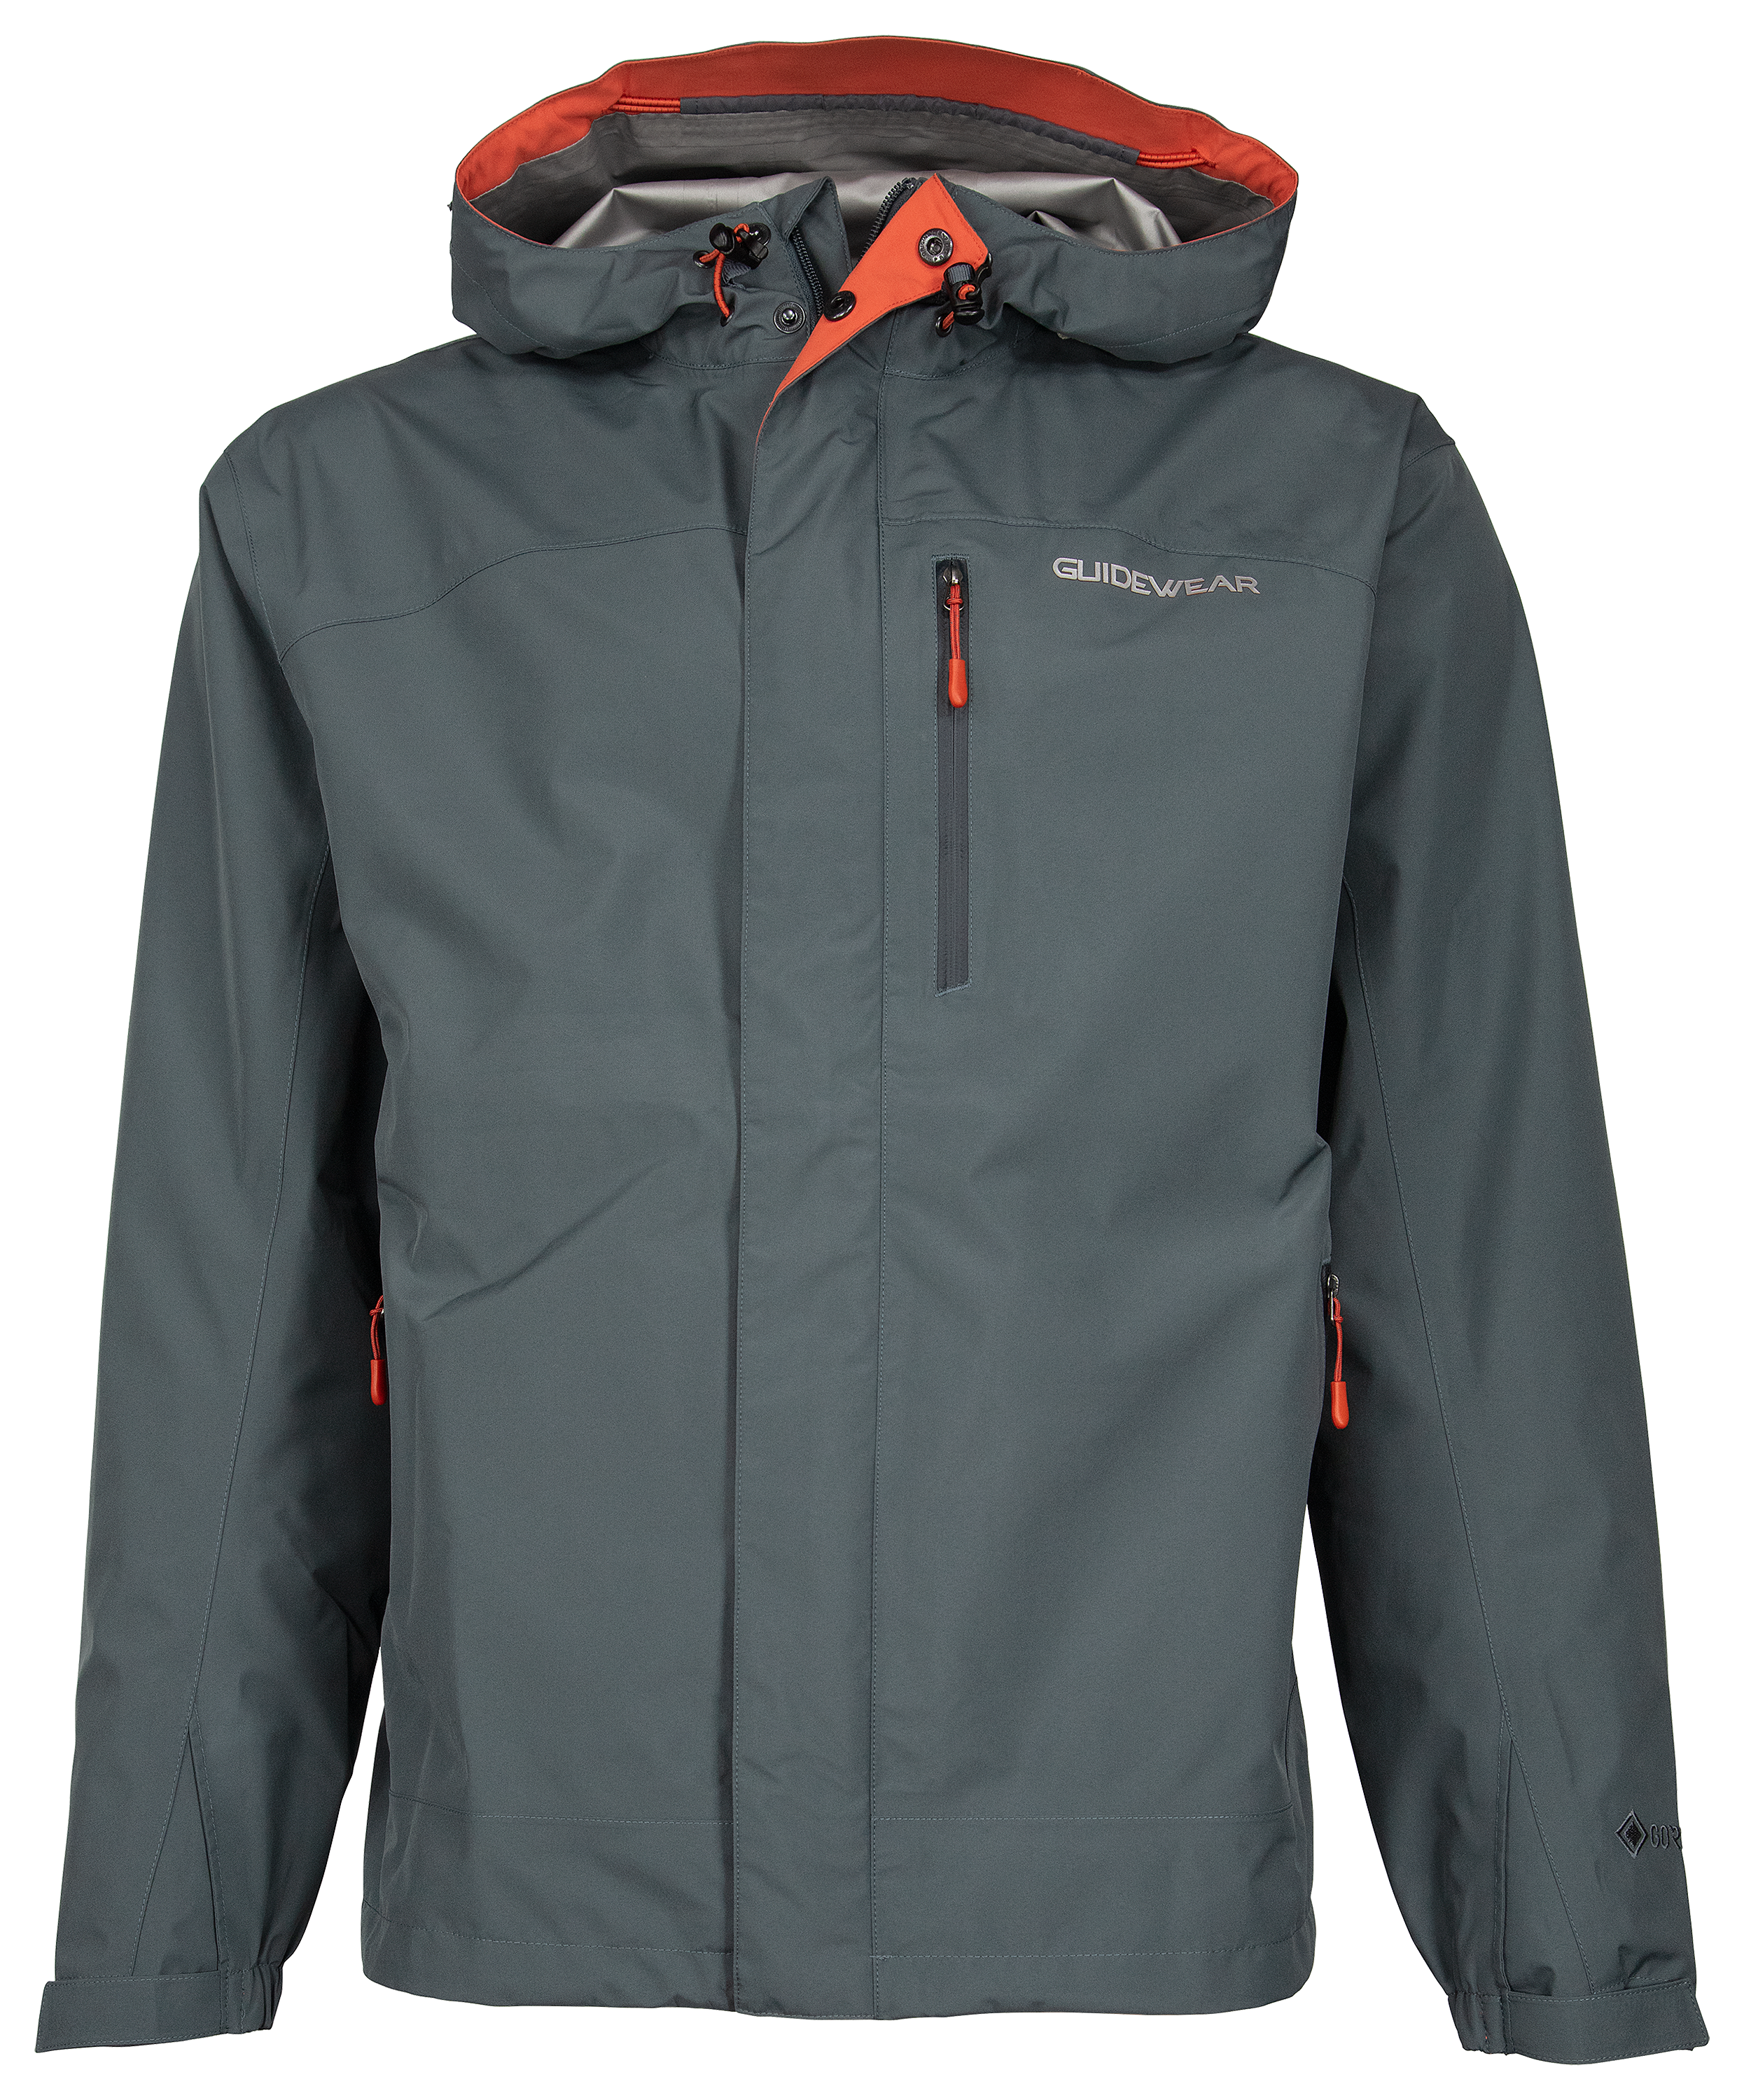 Johnny Morris Bass Pro Shops Guidewear Rainy River Jacket with GORE-TEX Paclite for Men - Turbulence - 2XL